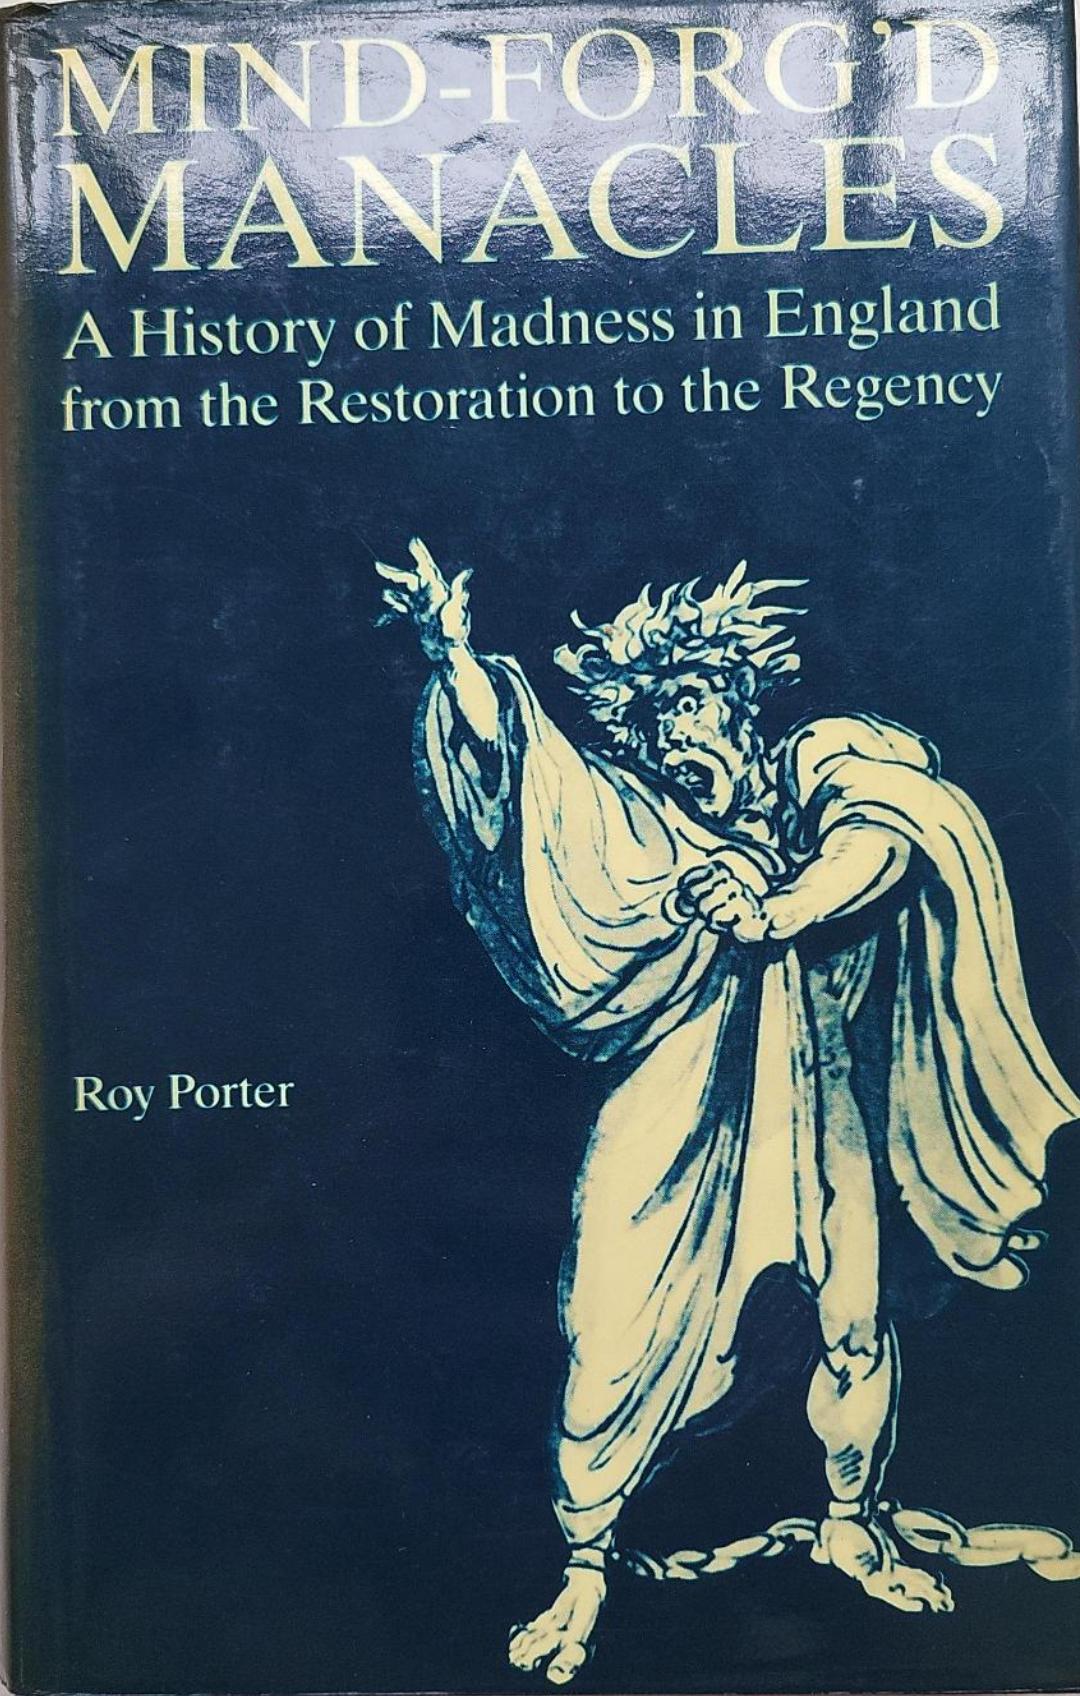 Mind-Forg'd Manacles: A History of Madness in England from the Restoration to the Regency, by Roy Porter